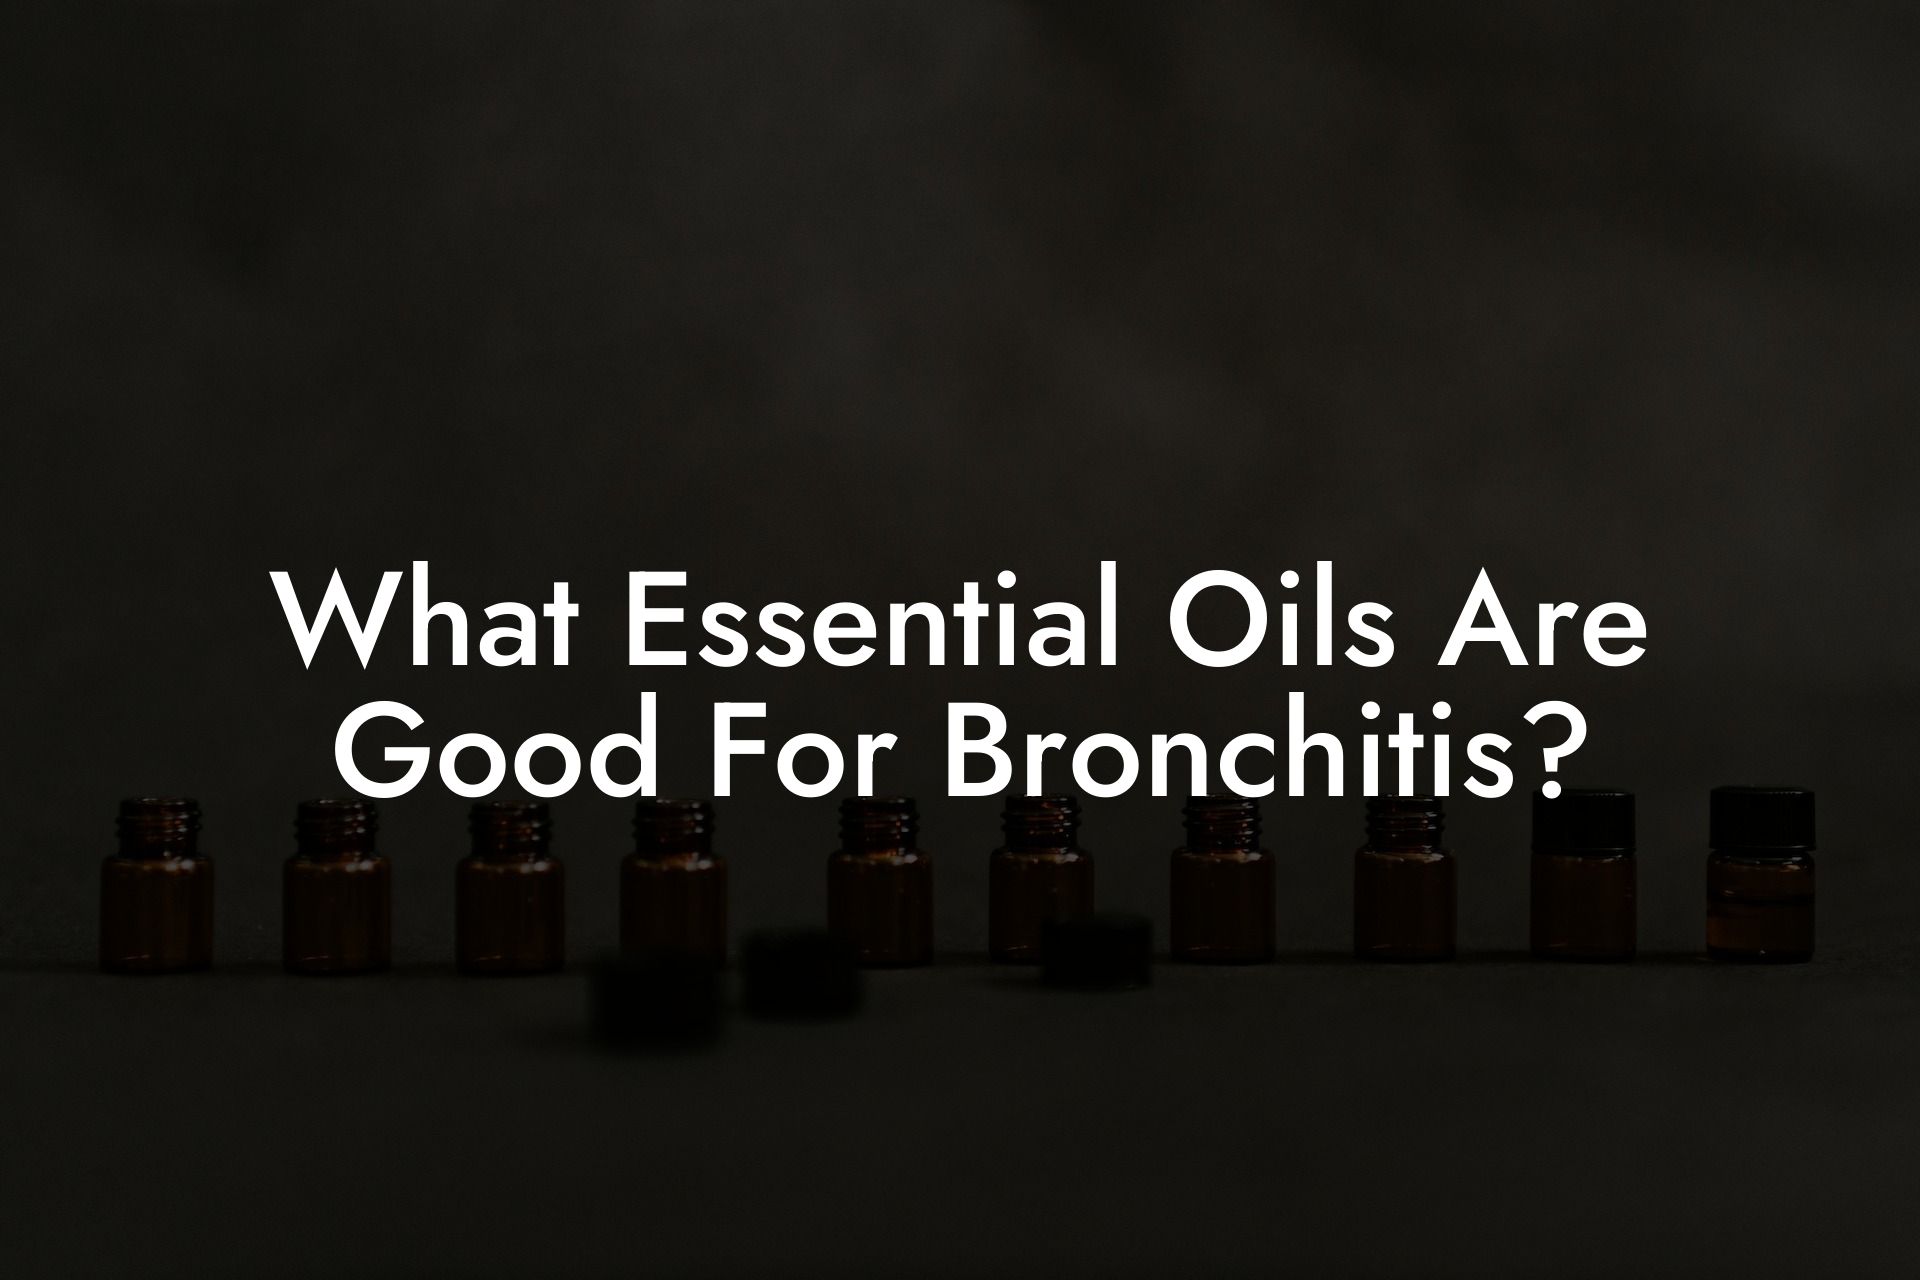 What Essential Oils Are Good For Bronchitis?